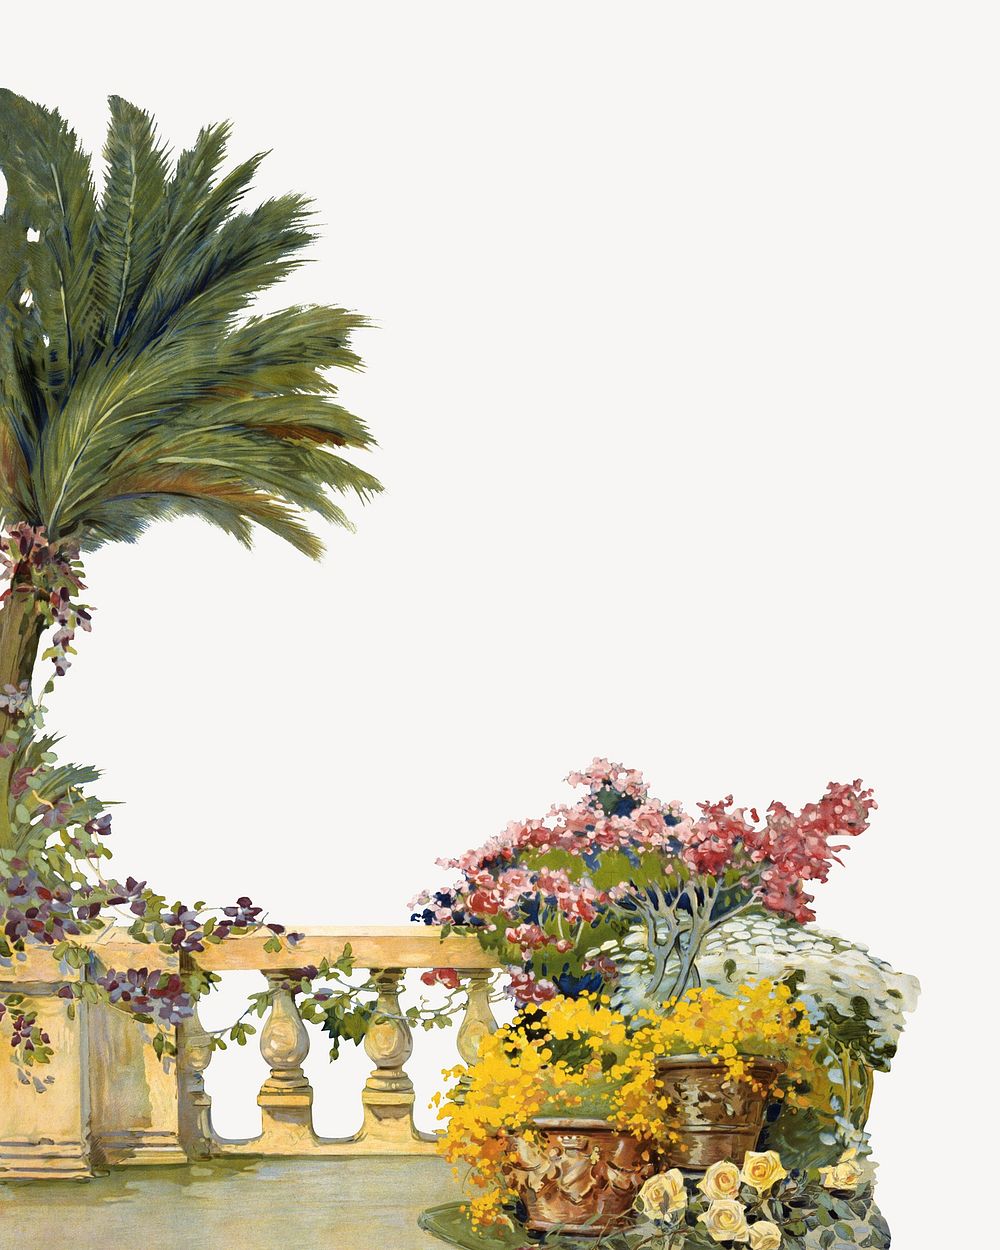 Sanremo balcony border. Remixed from vintage artwork by rawpixel.